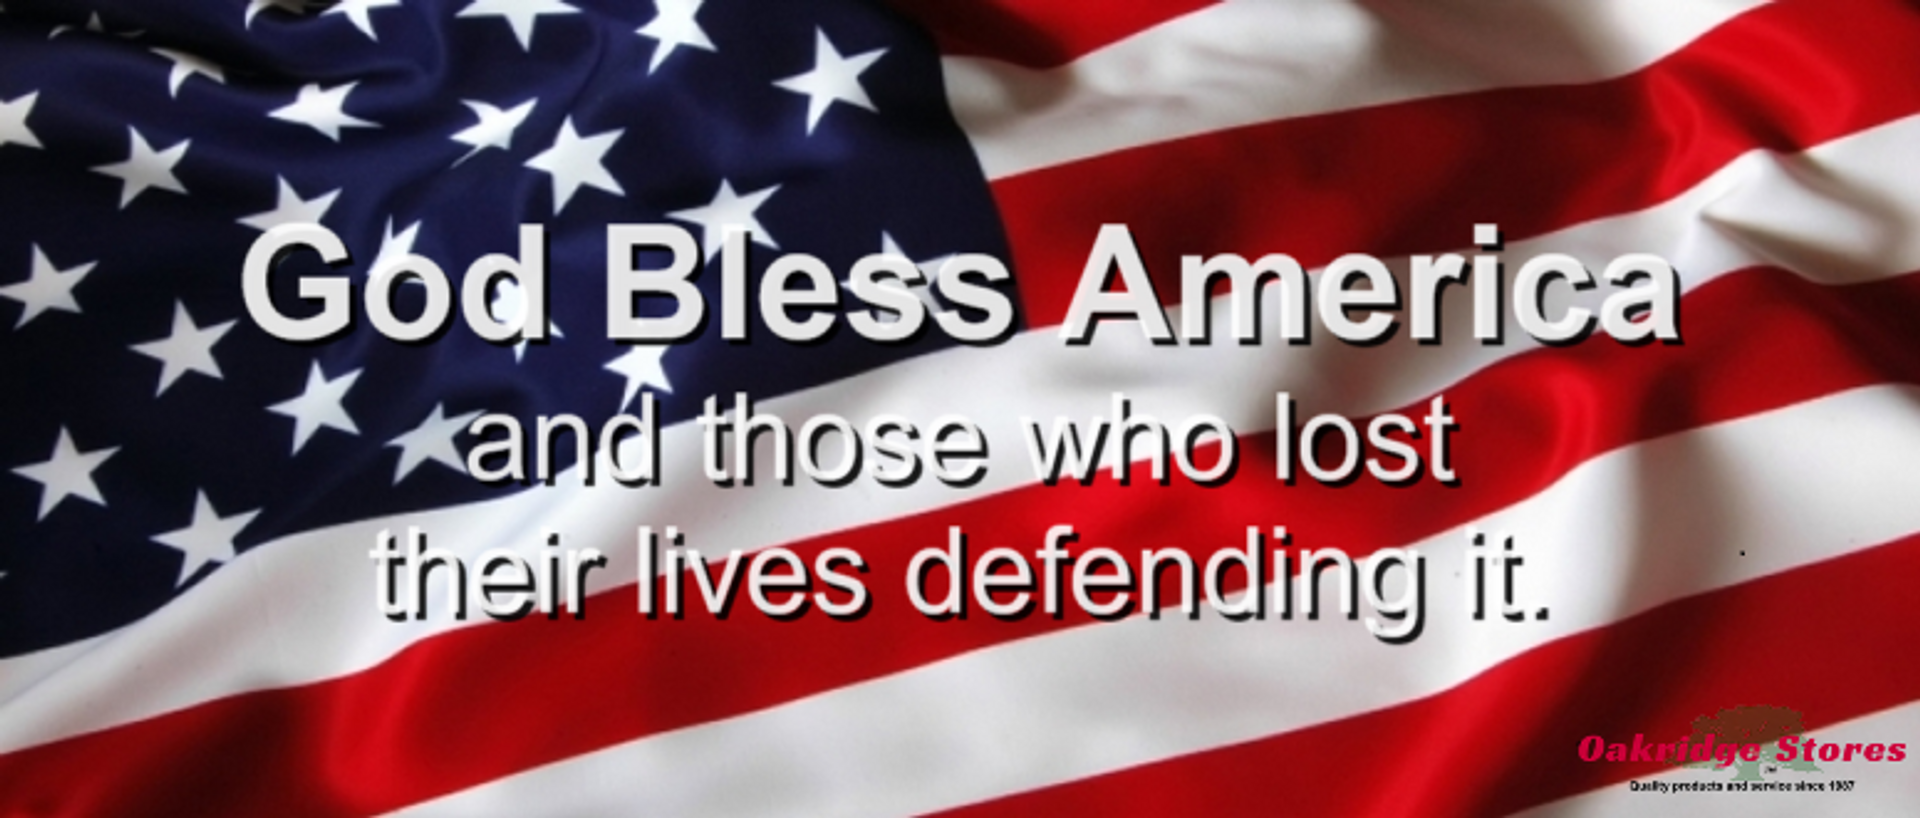 God Bless America and those who lost their lives defending it.